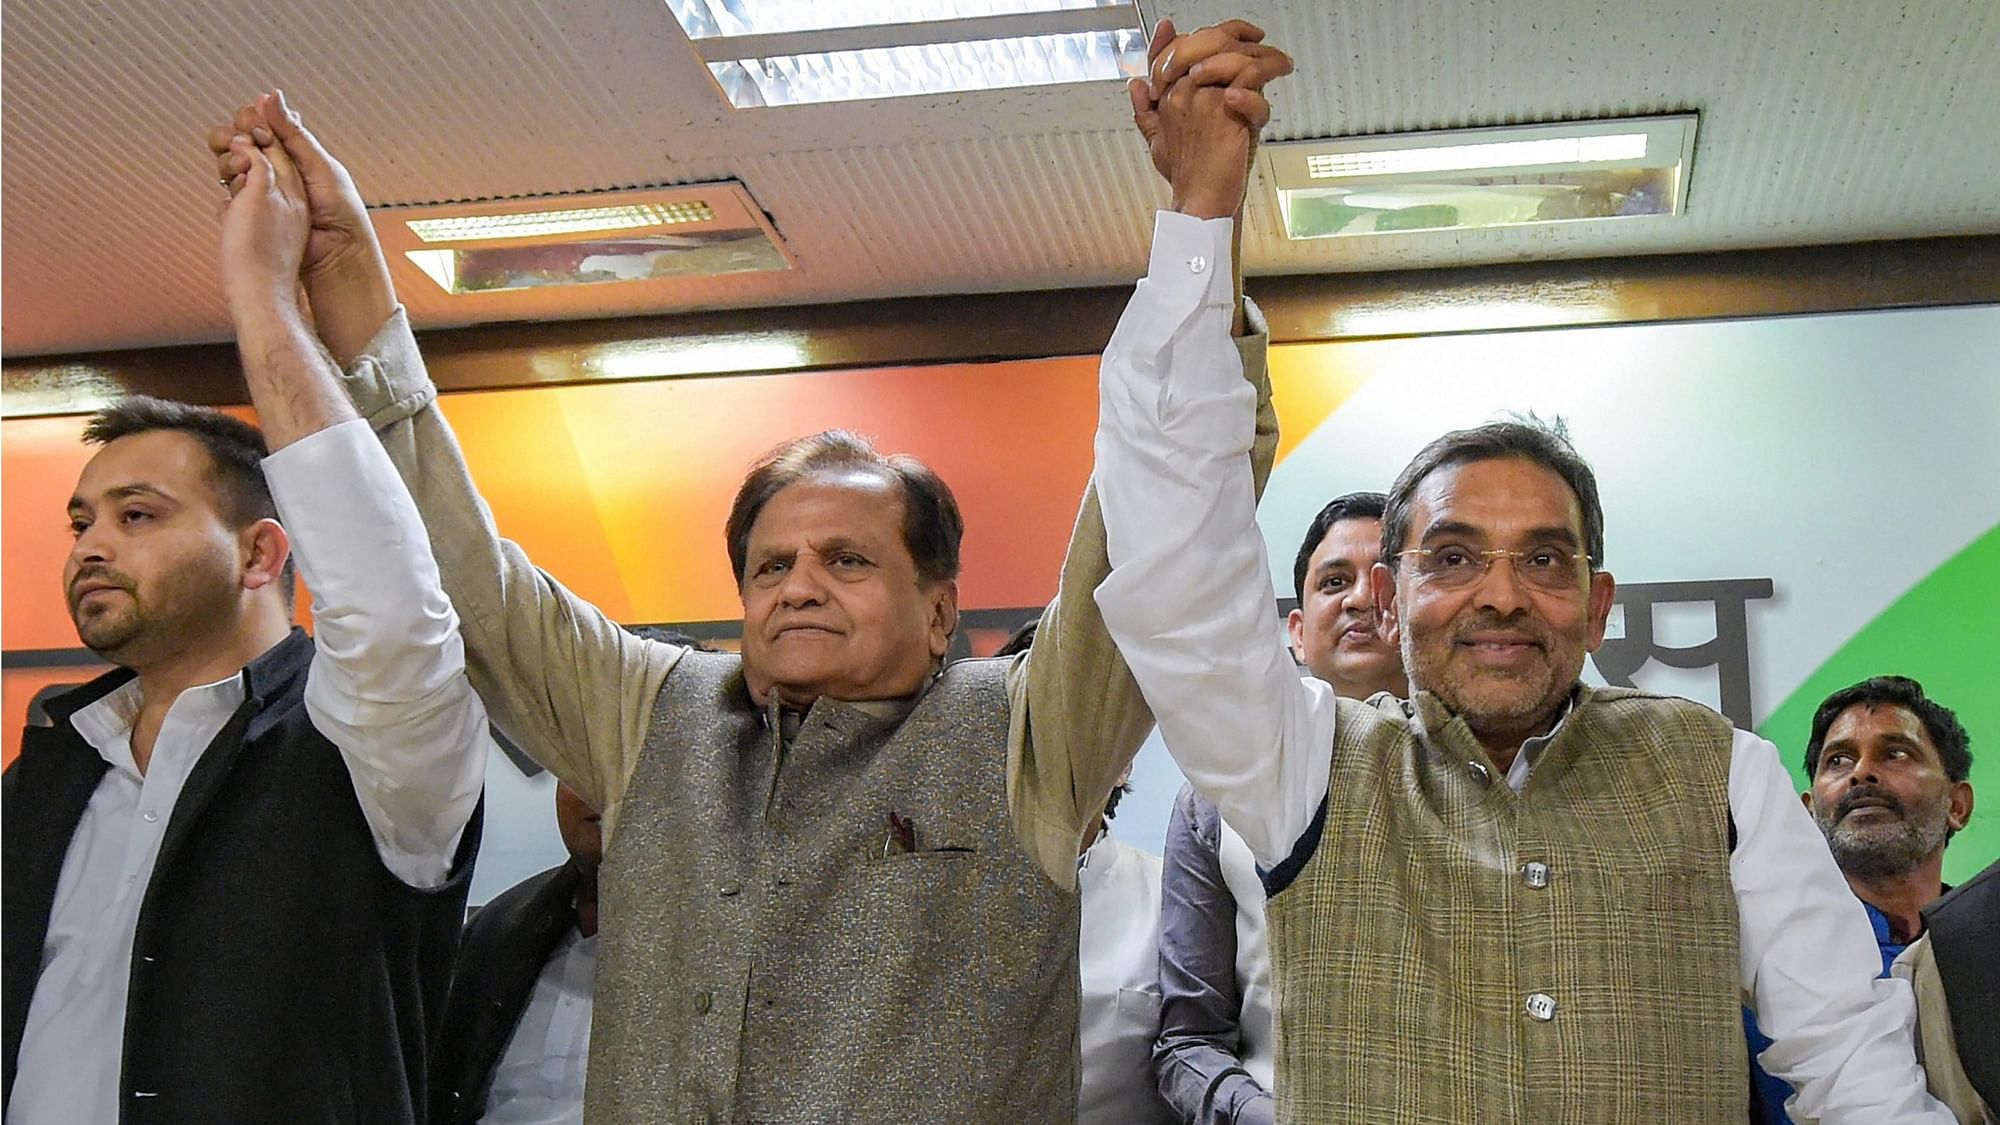 RLSP leader Upendra Kushwaha raises hands with Congress leader Ahmed Patel and RJD’s Tejashwi Yadav after joining the grand alliance.&nbsp;